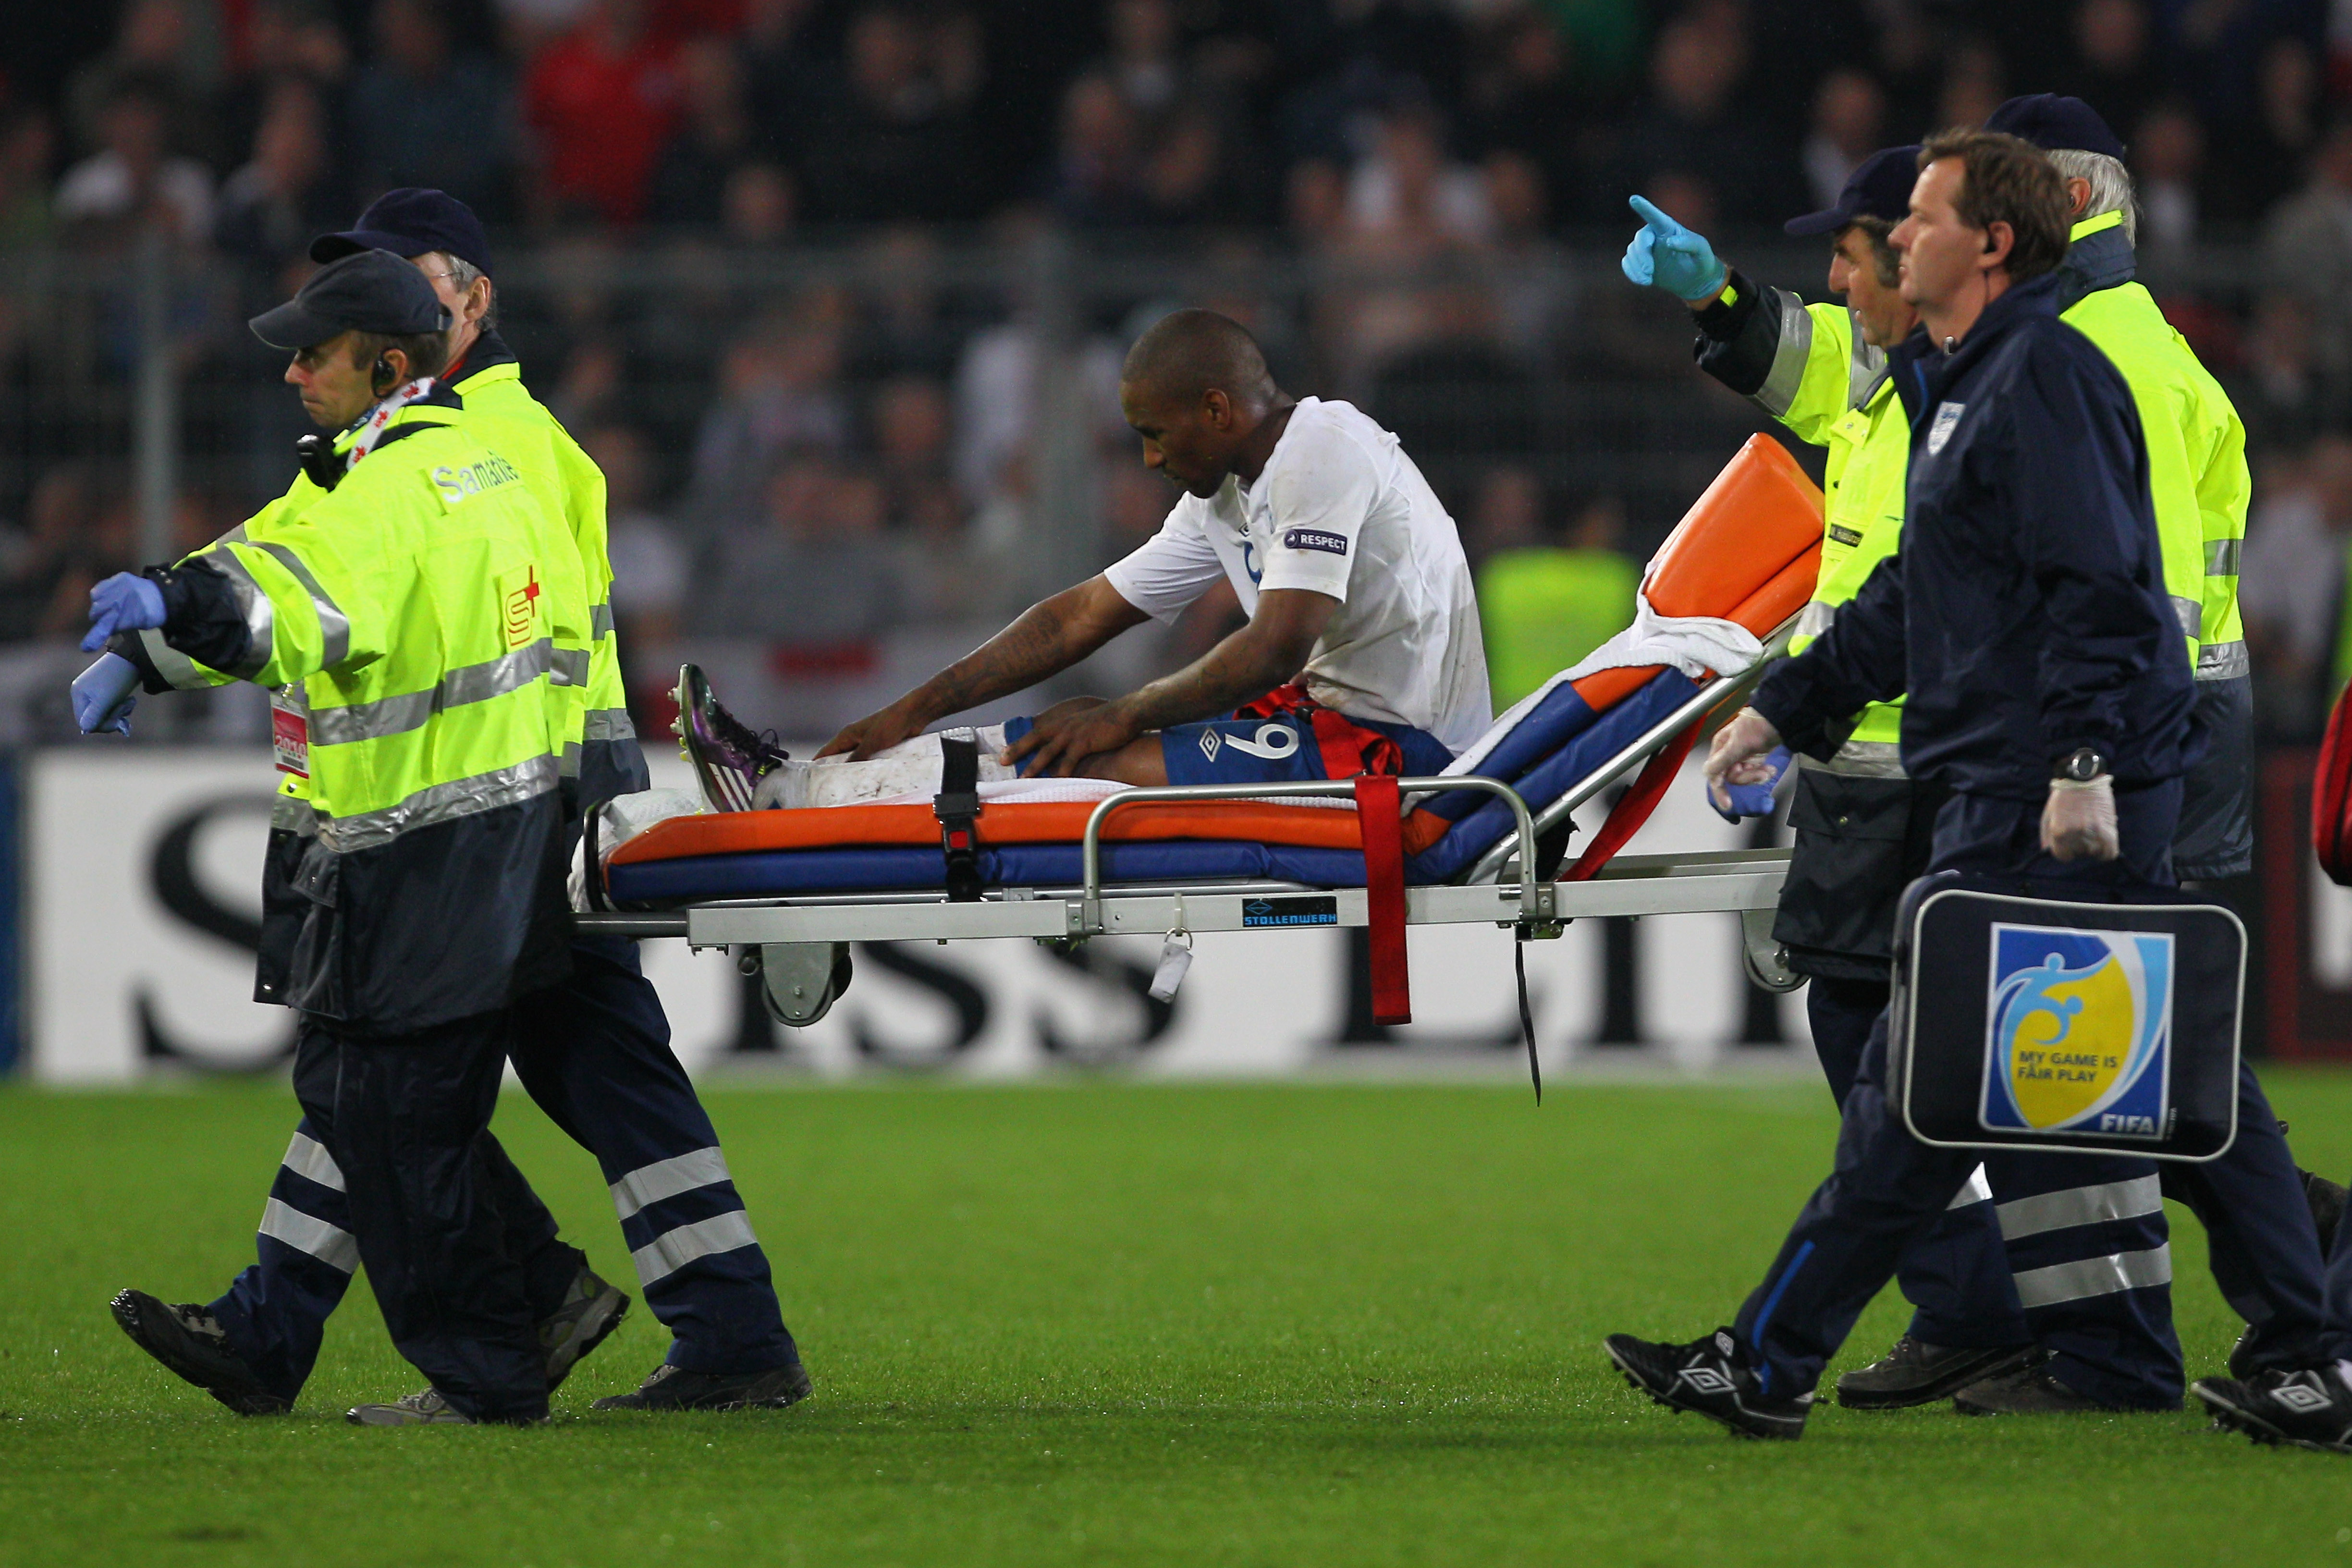 BASEL, SWITZERLAND - SEPTEMBER 07:  Jermain Defoe of England leaves the field on a stretcher after being injured during the UEFA EURO 2012 Group G Qualifier between Switzerland and England at St Jakob Park on September 7, 2010 in Basel, Switzerland.  (Pho